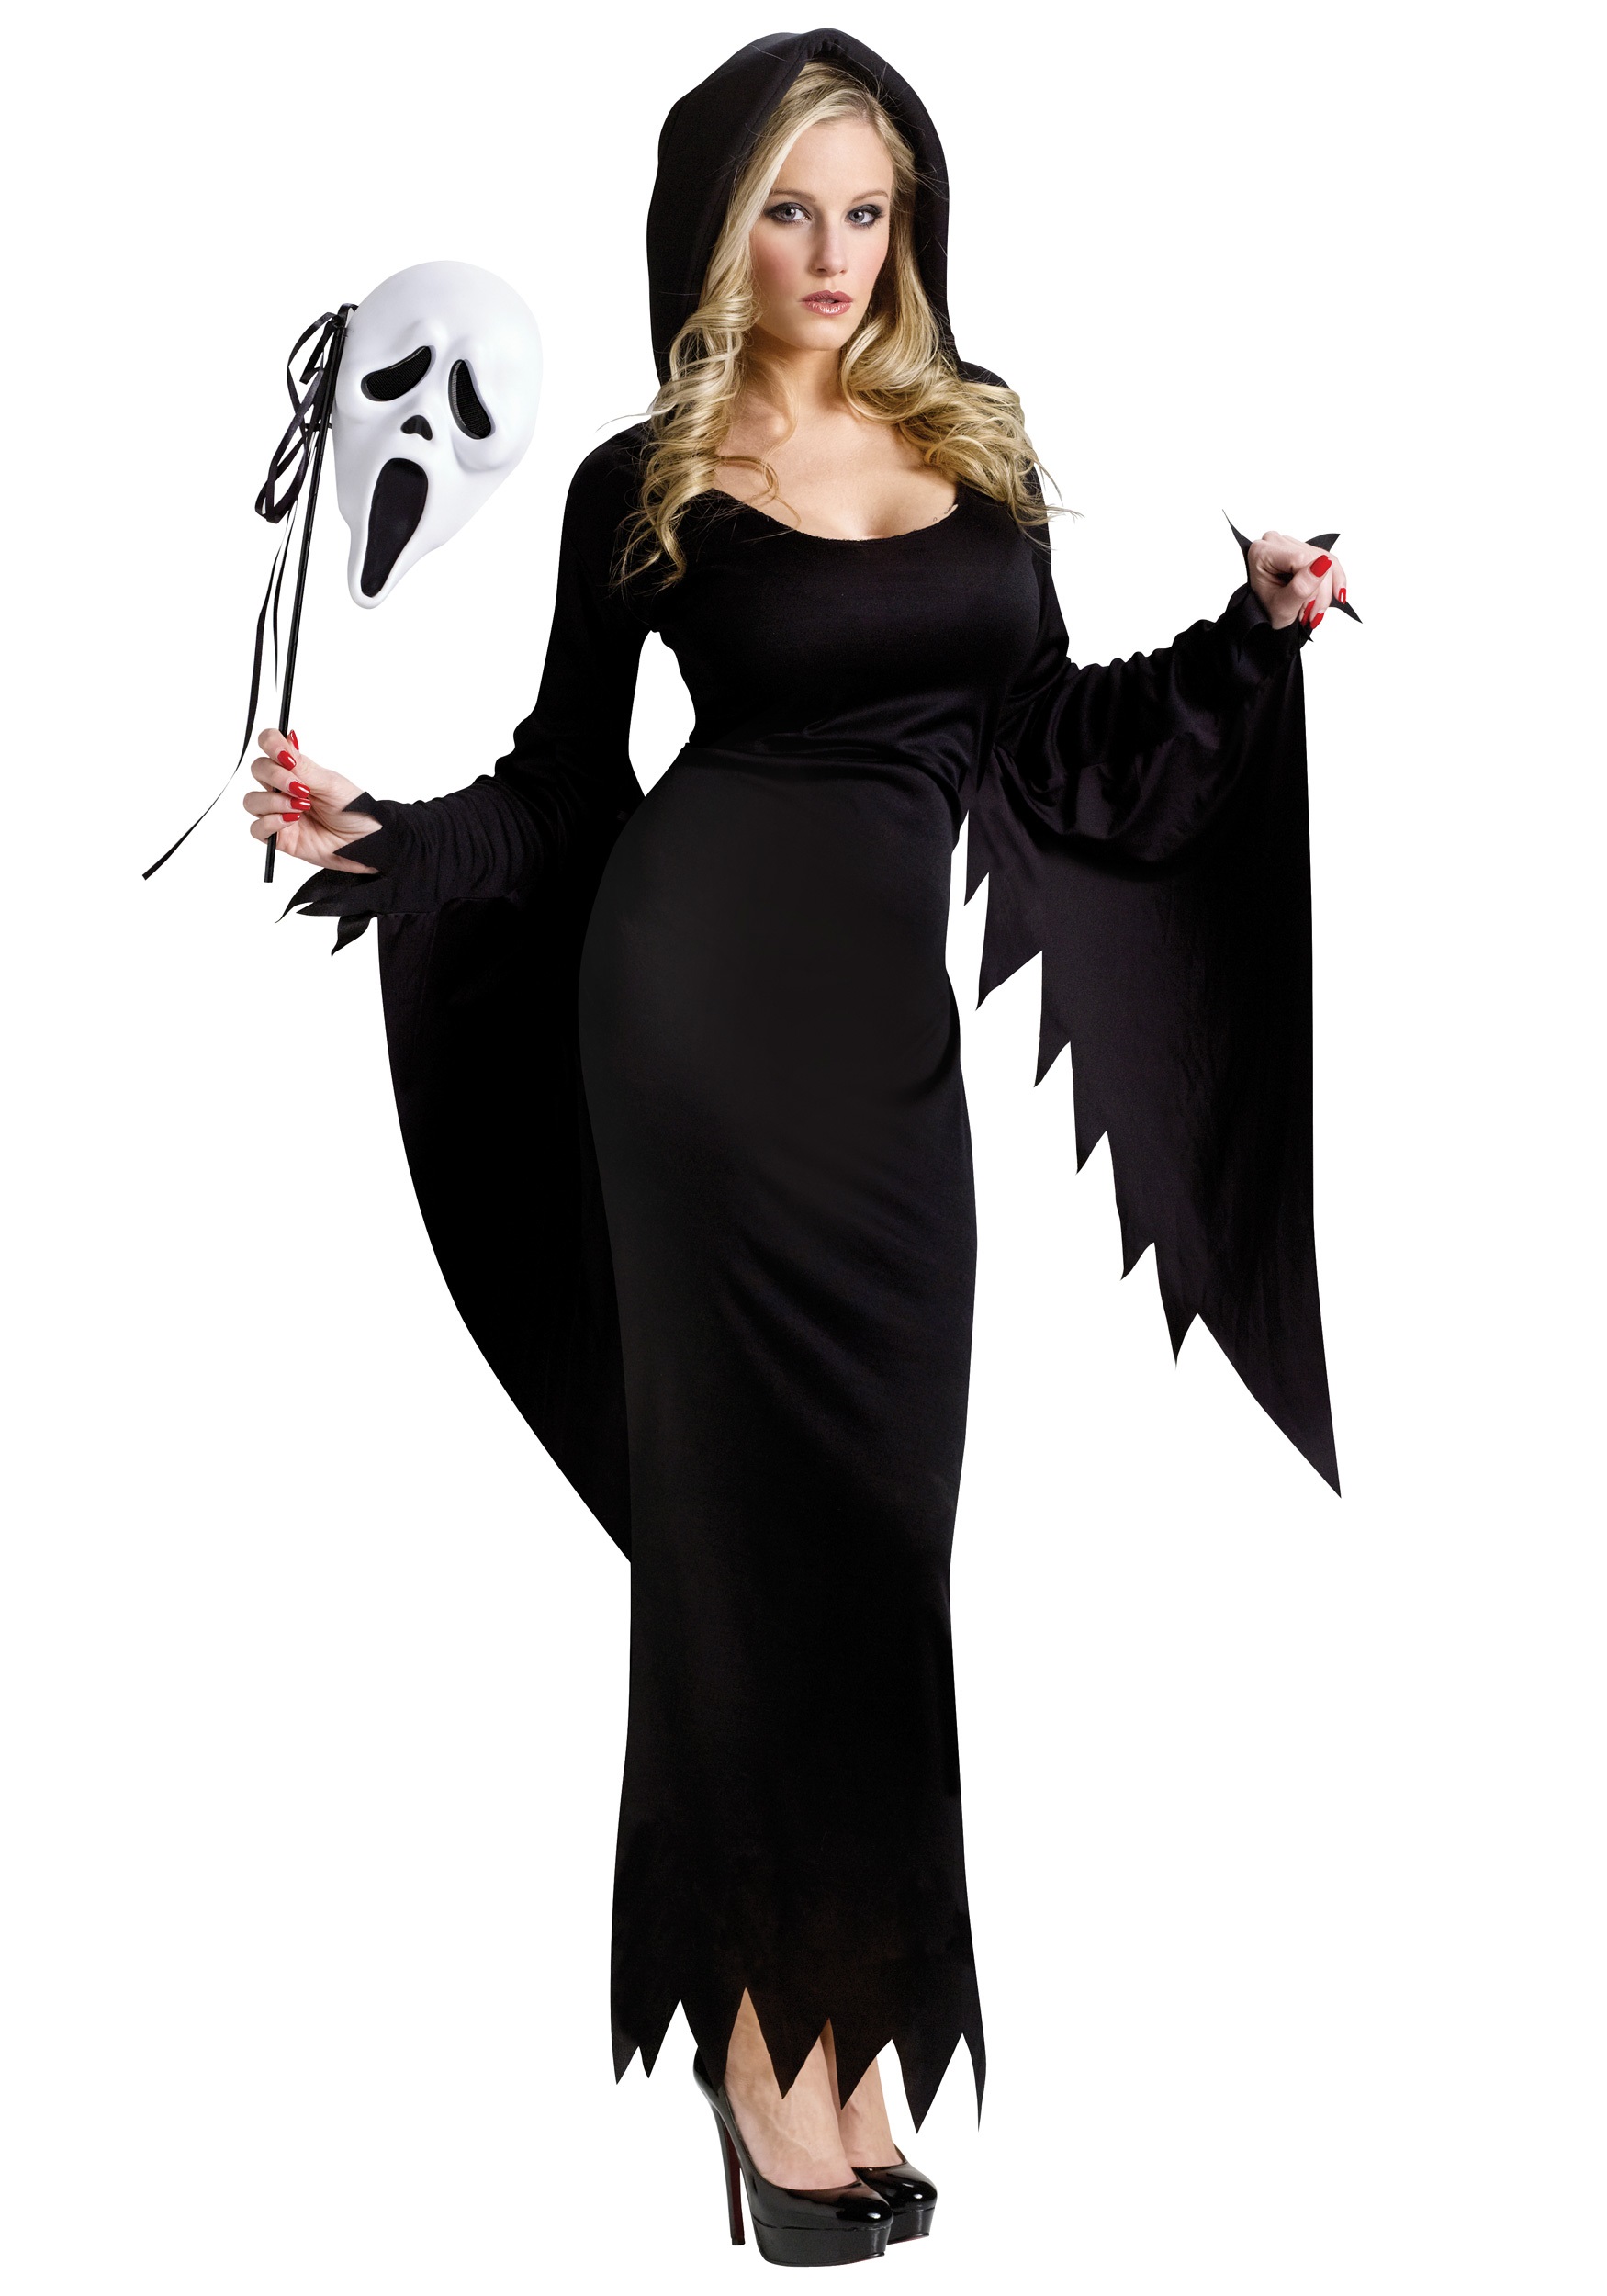 Womens Sexy Ghost Face Costume with Free Shipping in U.S., UK, Europe, Cana...